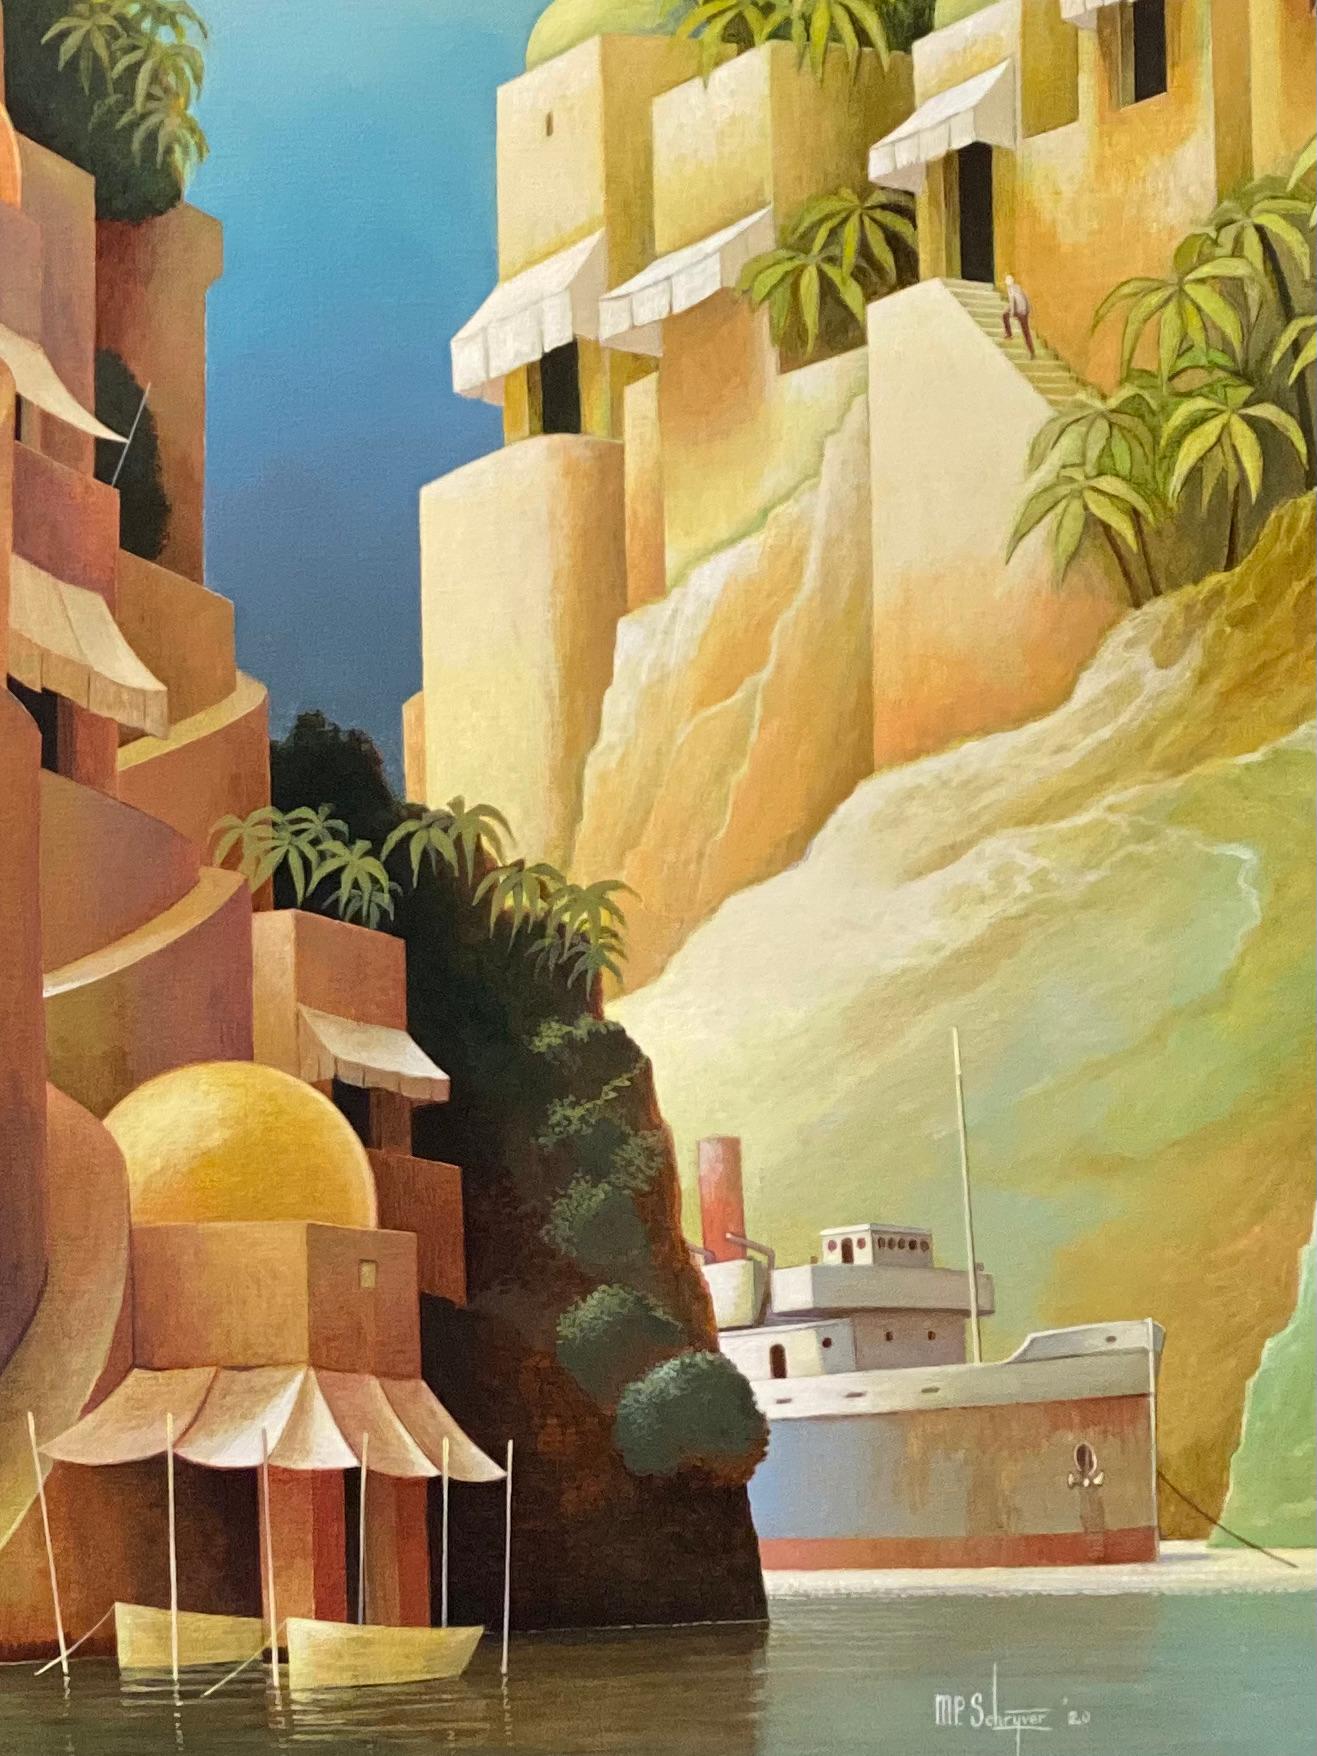 The Evening is far away- 21st Century Contemporary Painting  - Brown Landscape Painting by Michiel Schrijver